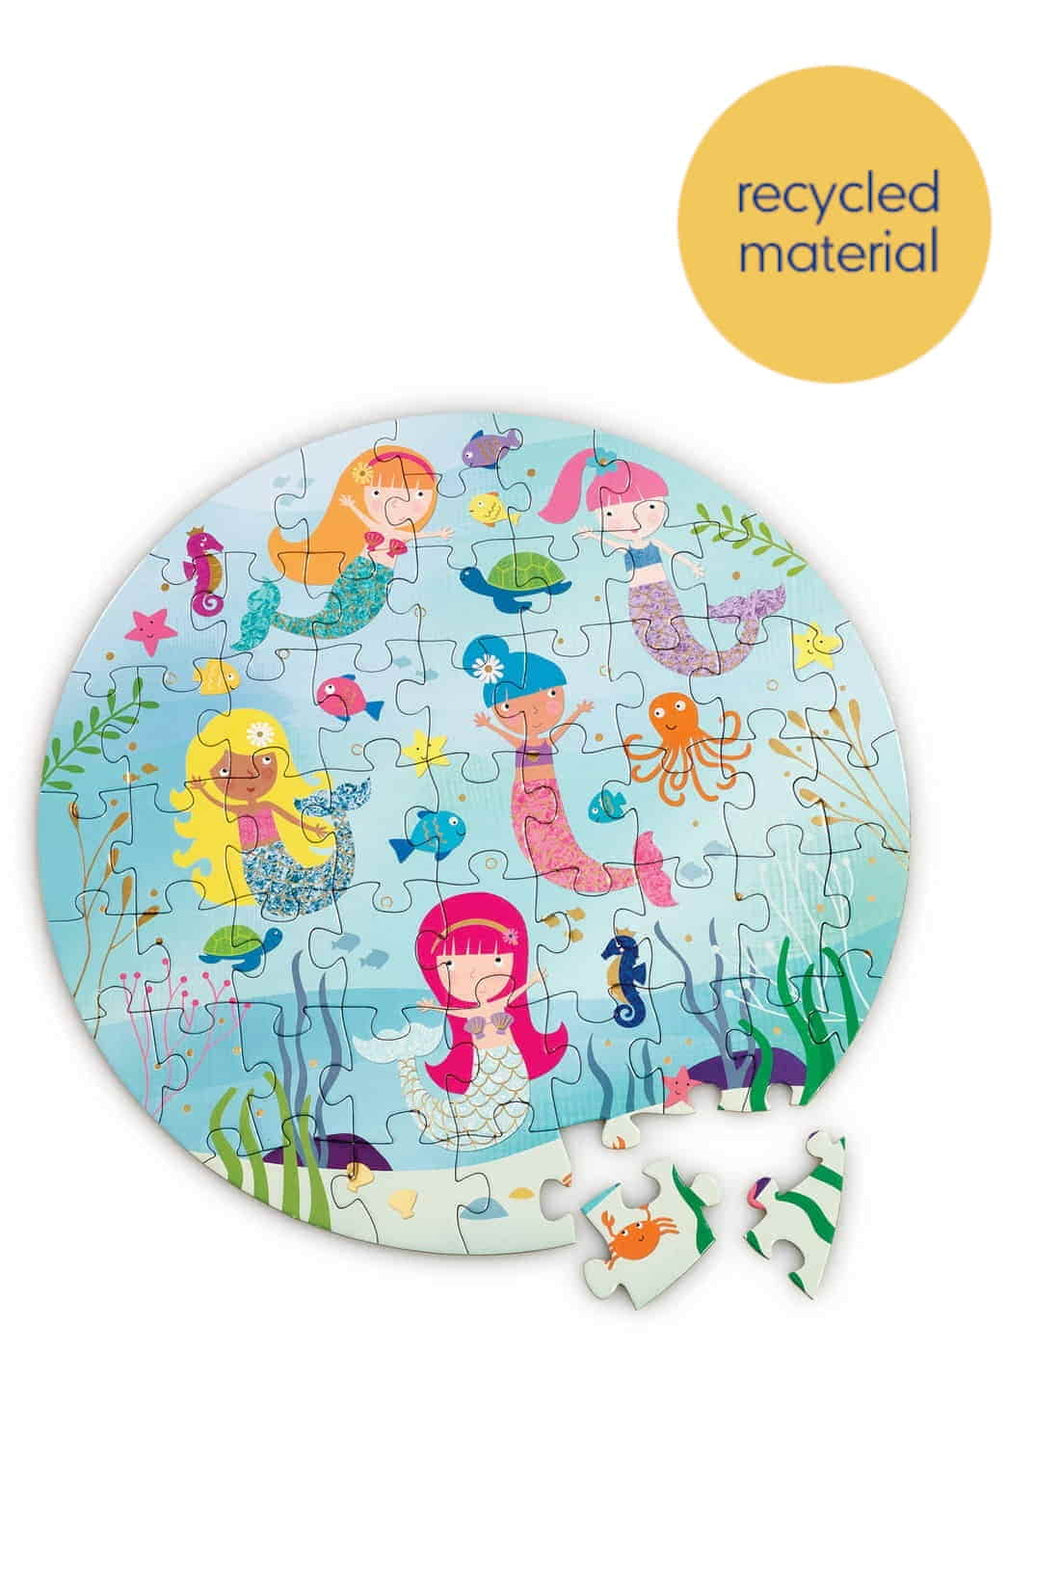 Early Learning Centre Mermaid 54 Piece Jigsaw Puzzle